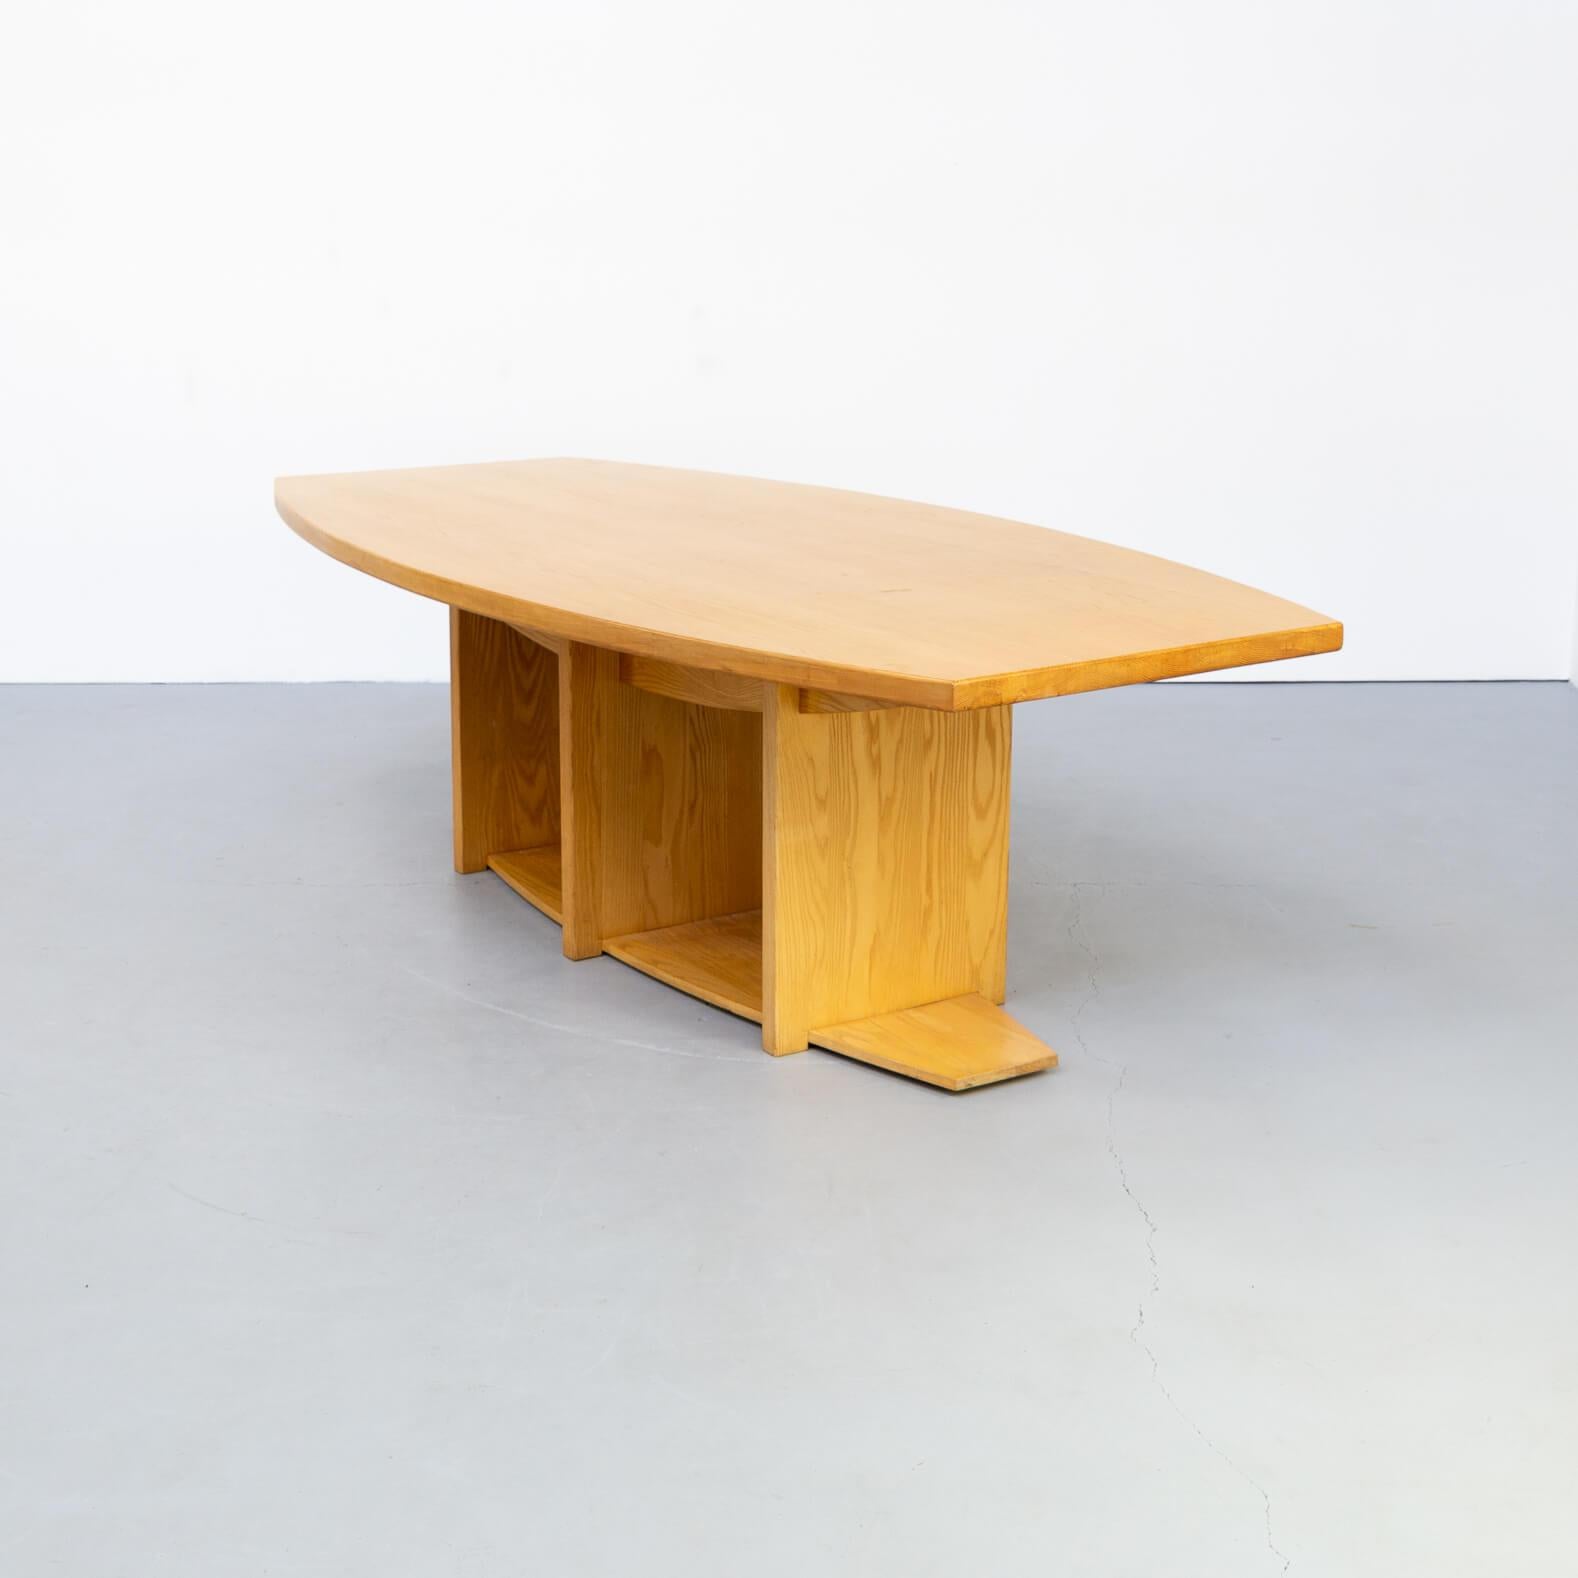 1980s Ashwood Architectural Taylor Made Oval Dining Table For Sale 5